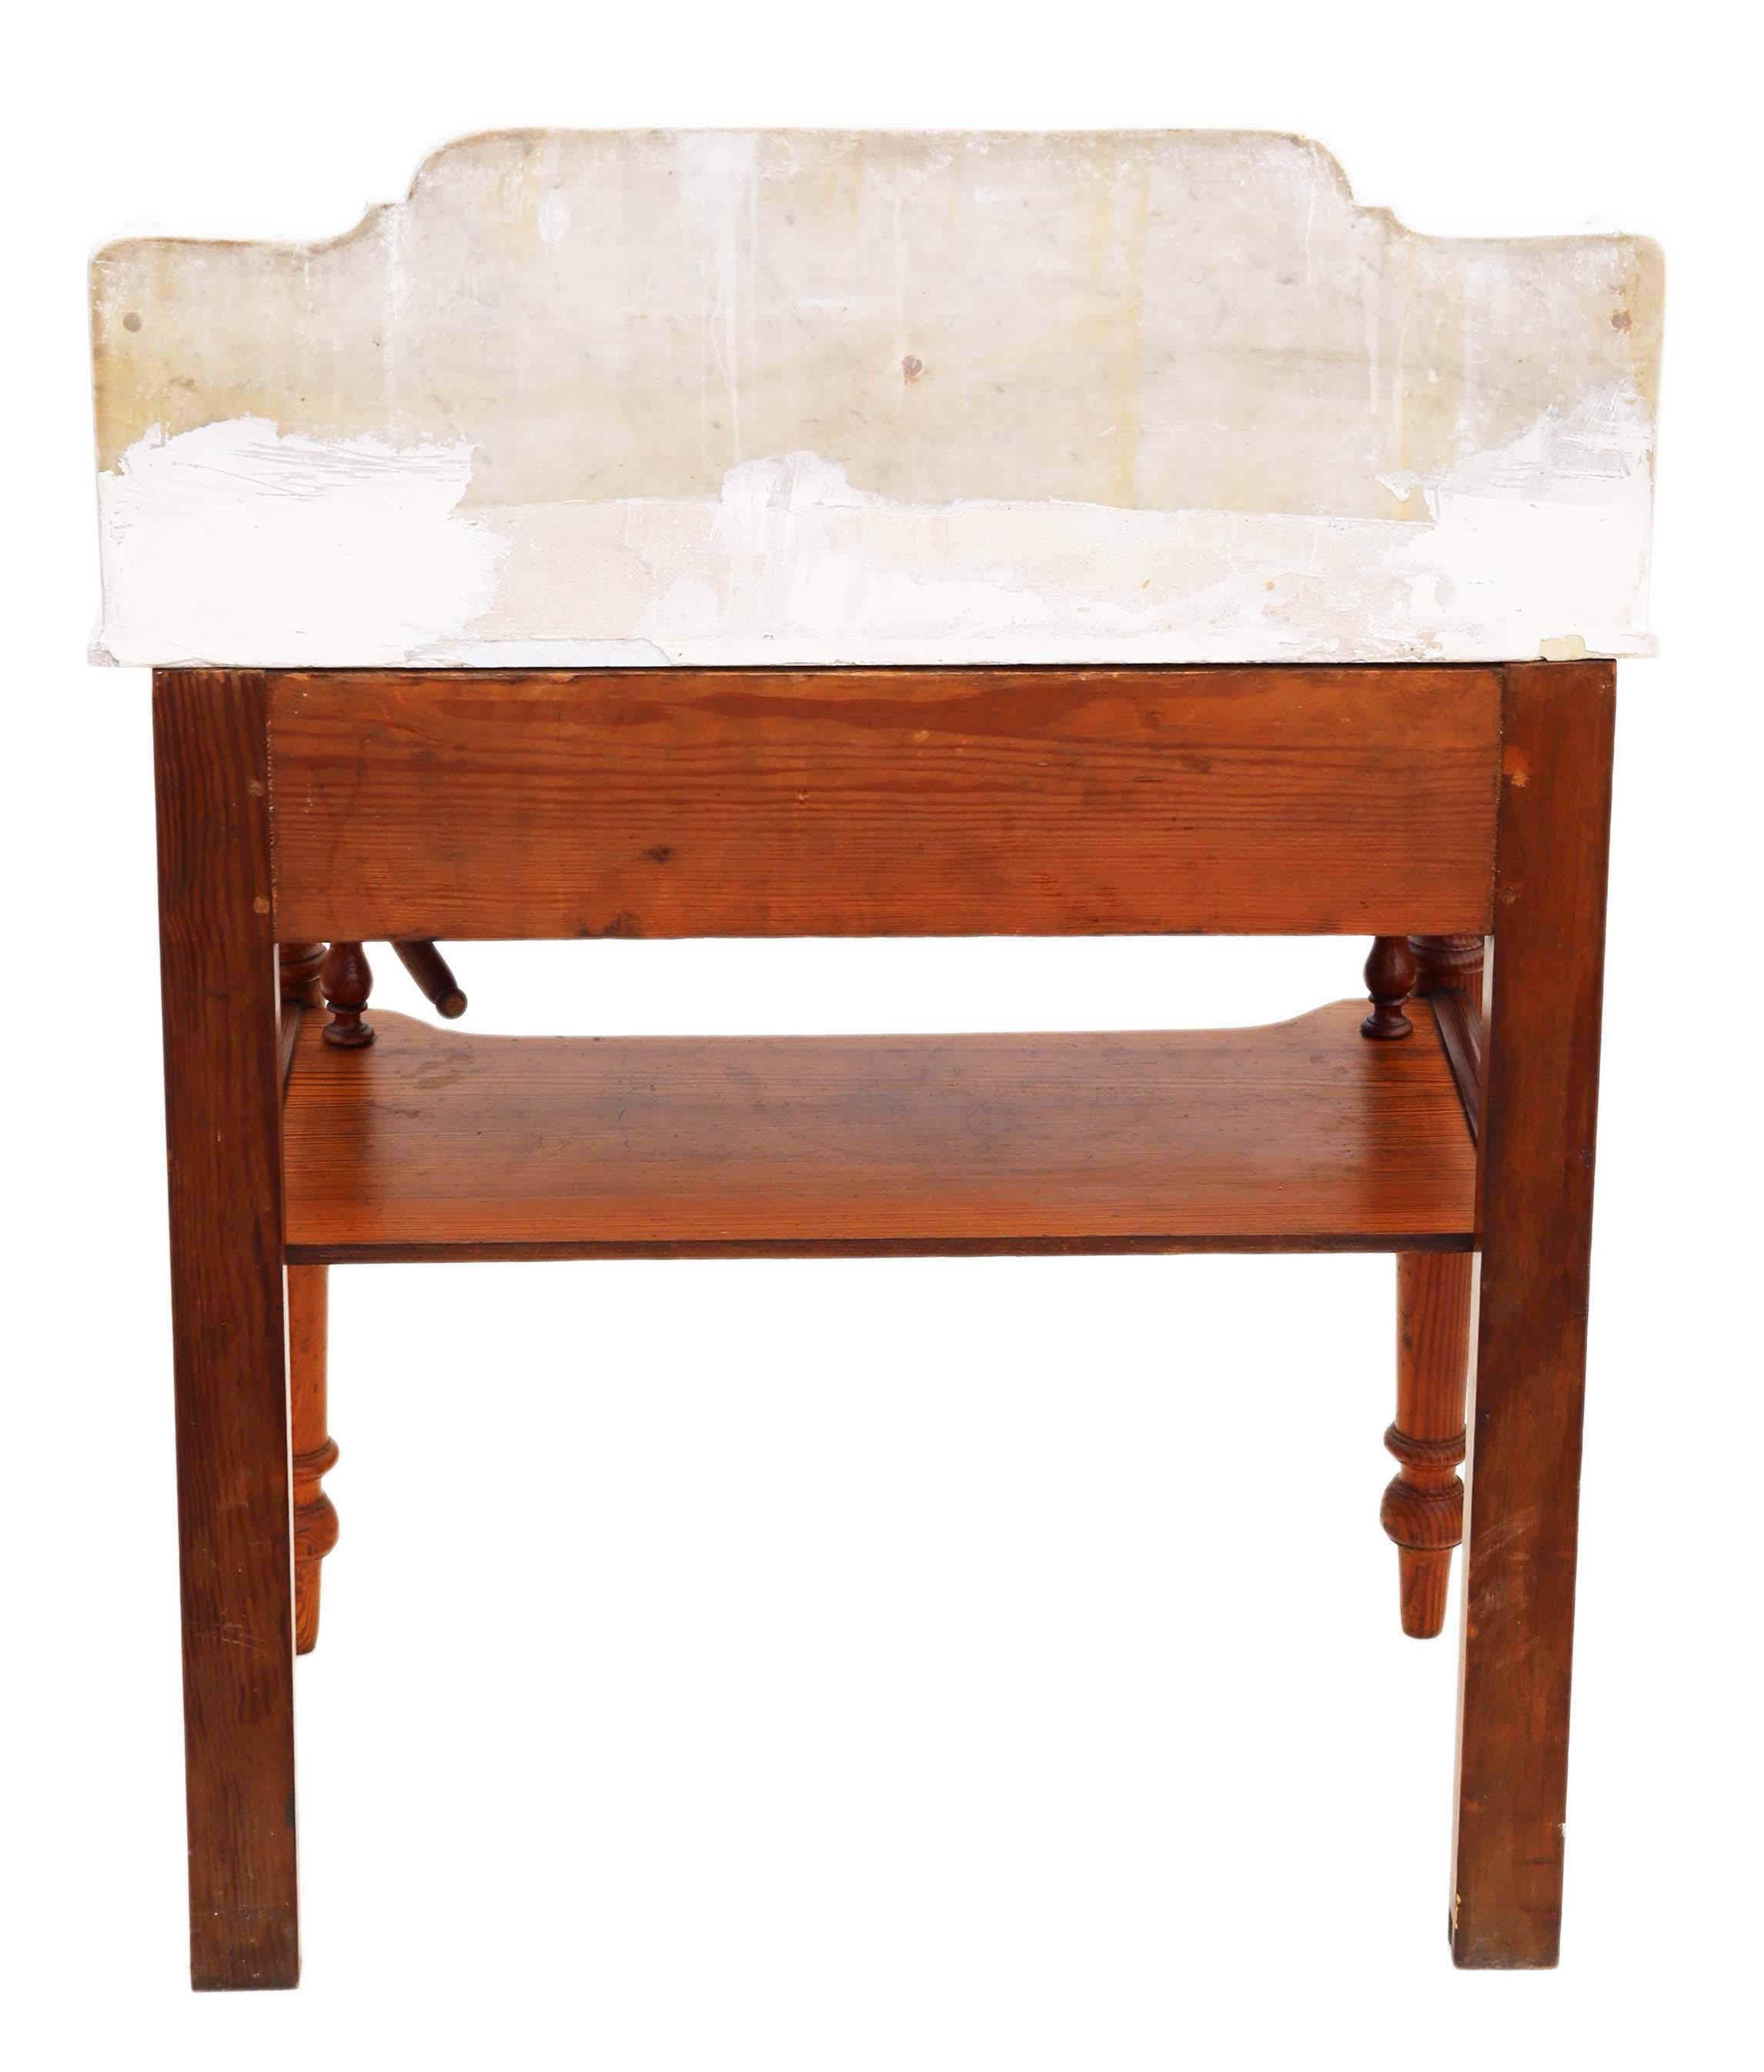 Antique Fine Quality Pitch Pine and Marble Wash Stand C1900 Compact Proportions 2